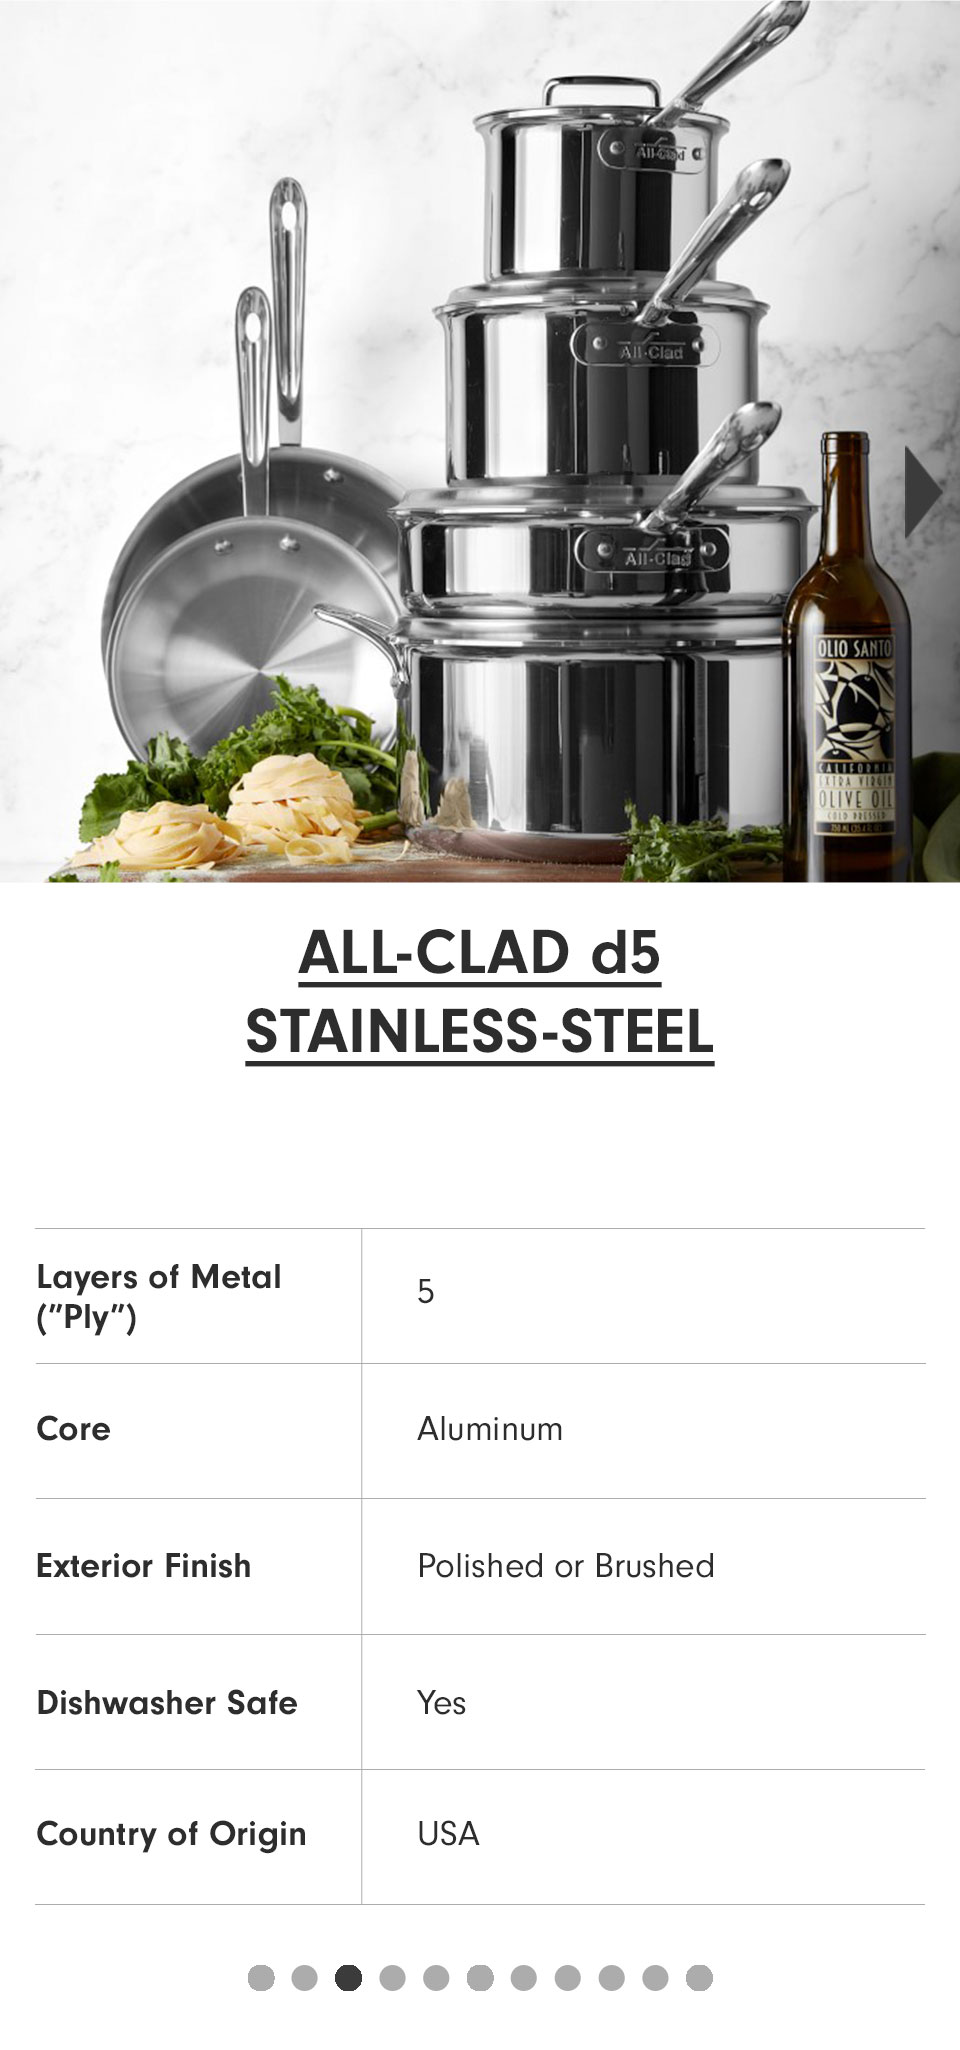 All-Clad d5 Stainless-Steel >